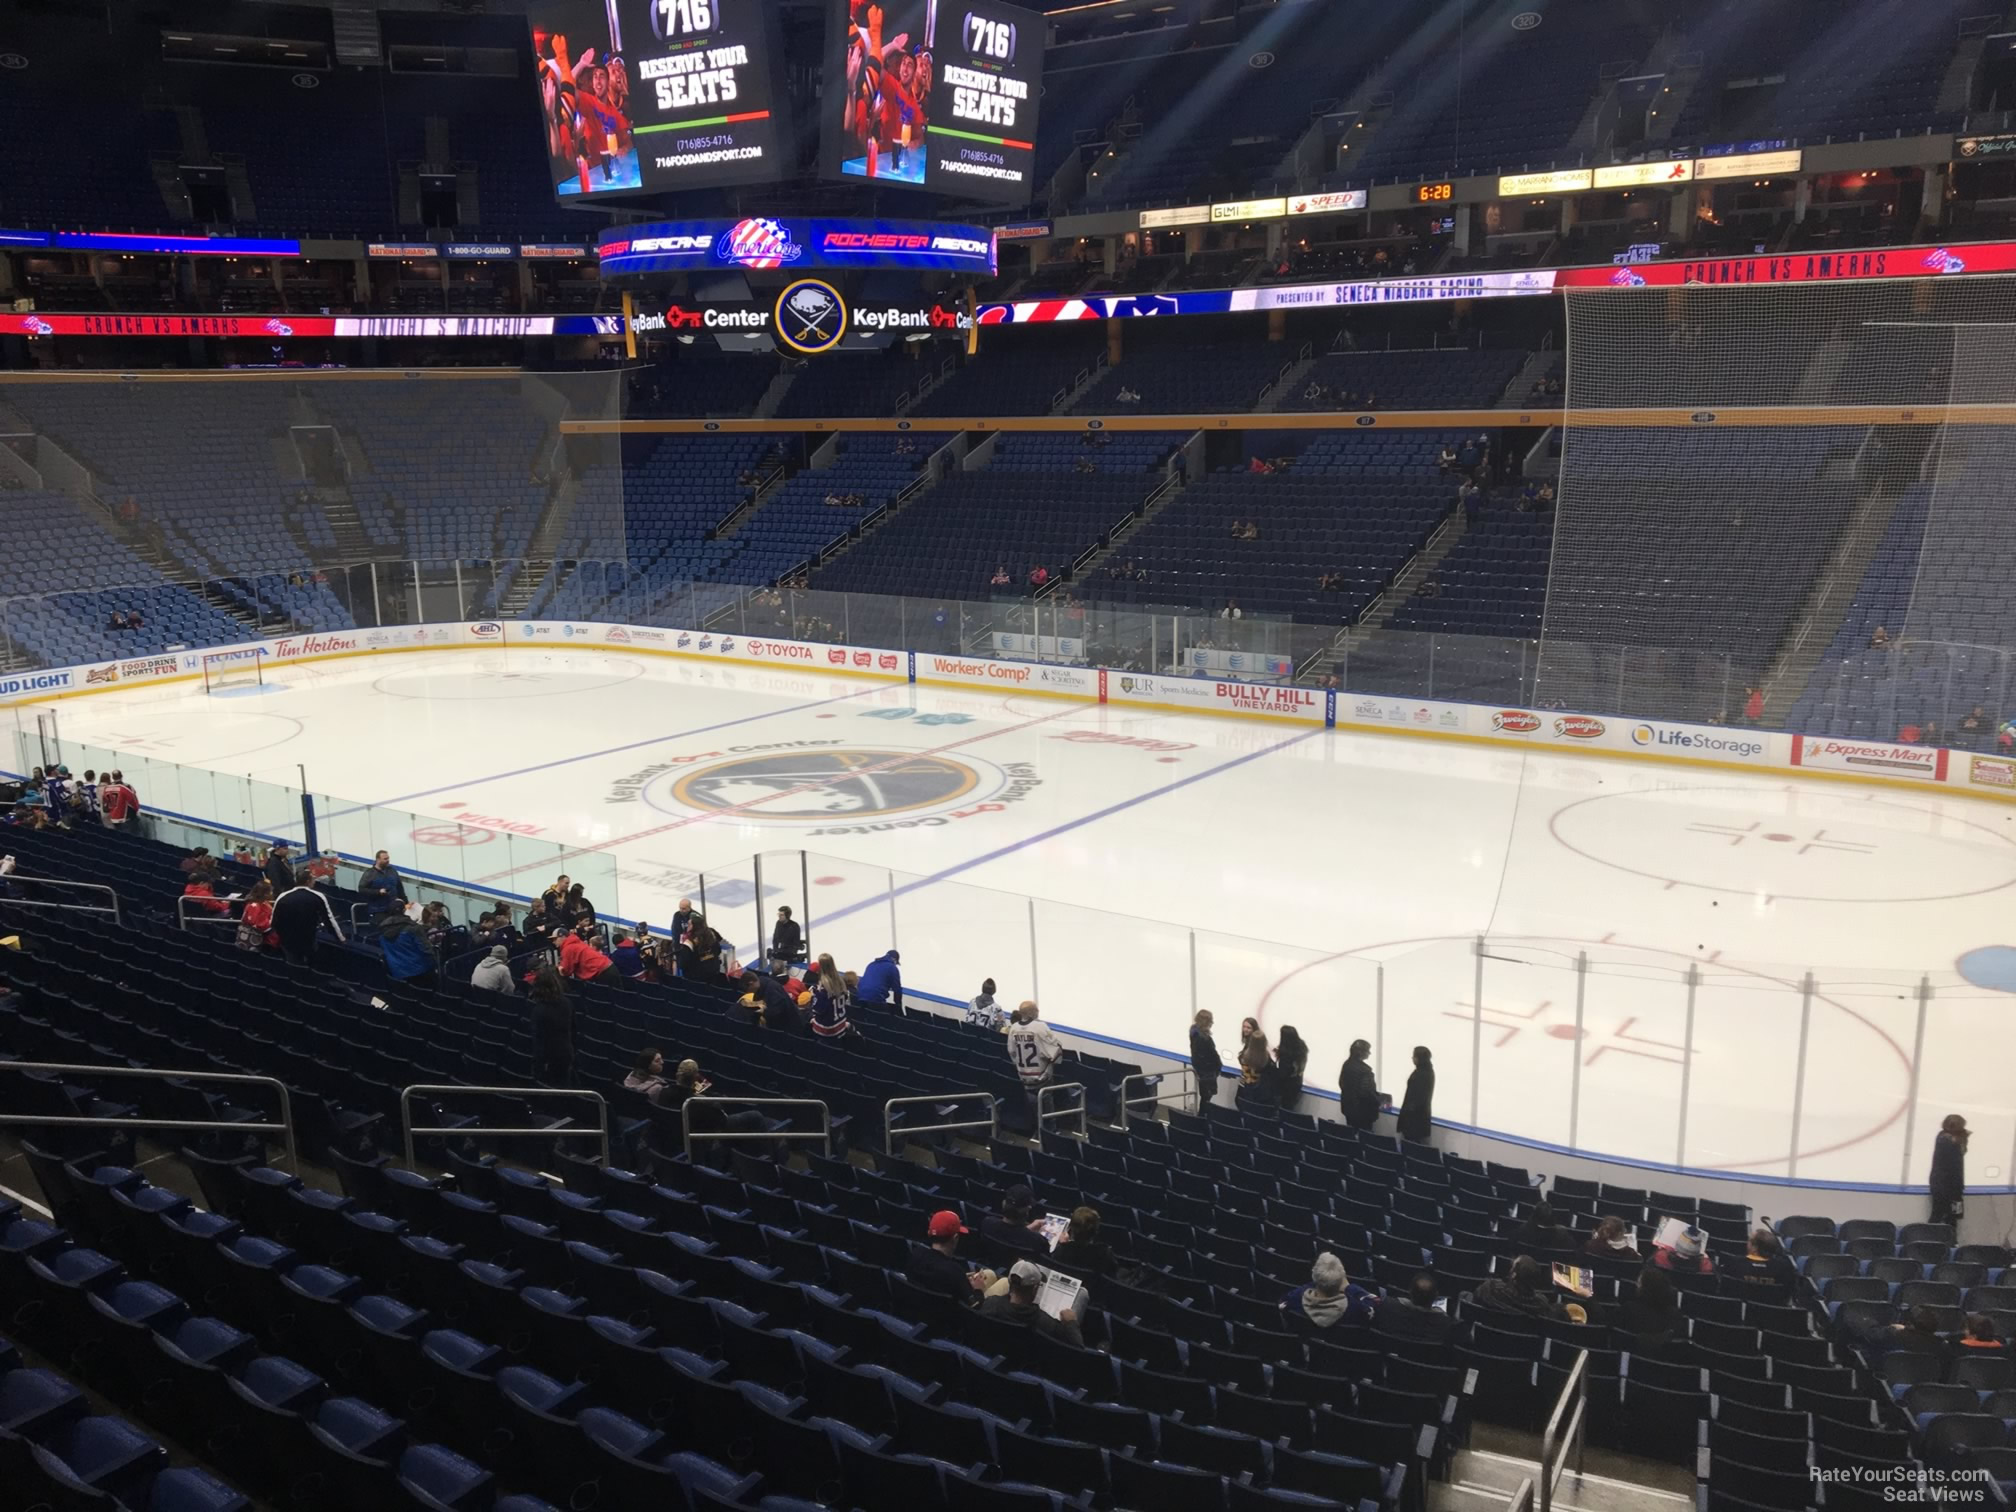 section 204, row 4 seat view  for hockey - keybank center